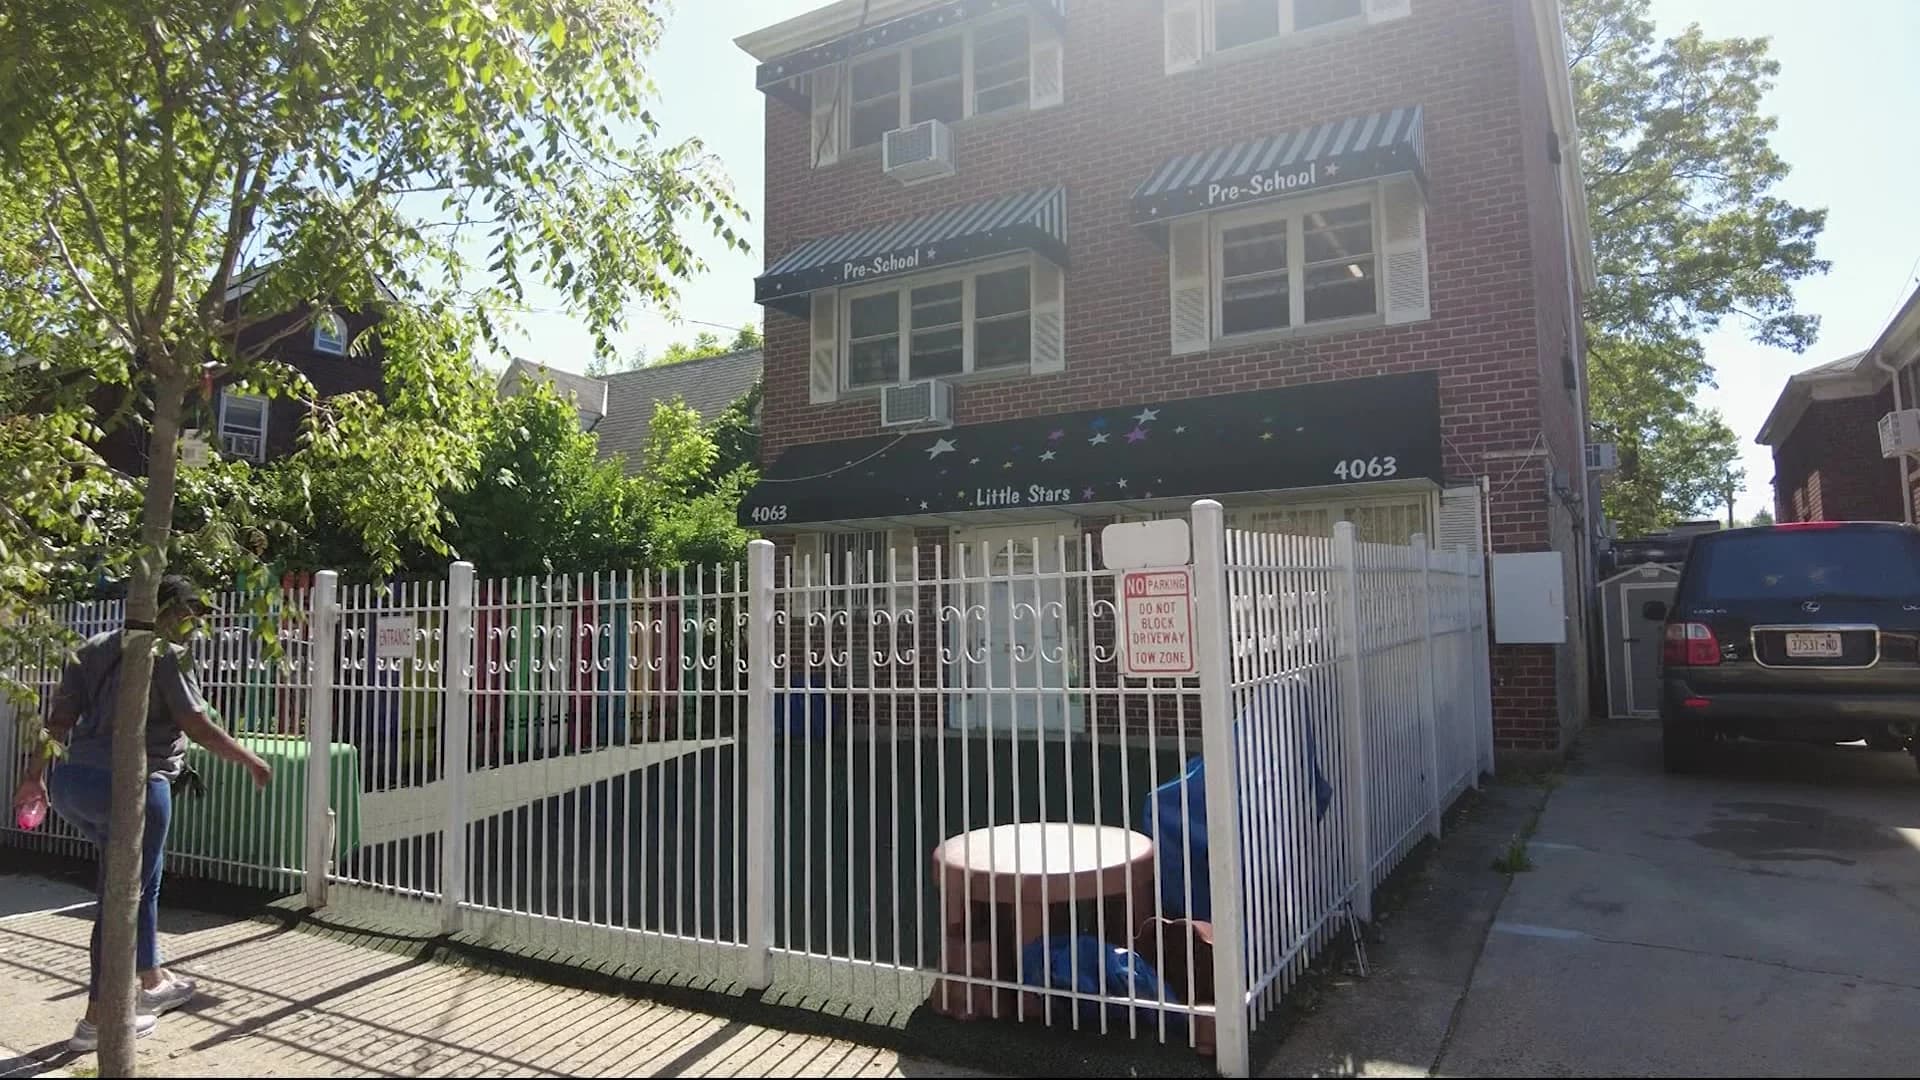 Police: Child care worker arrested for shoving 2-year-old boy's head into a table at Bronx preschool